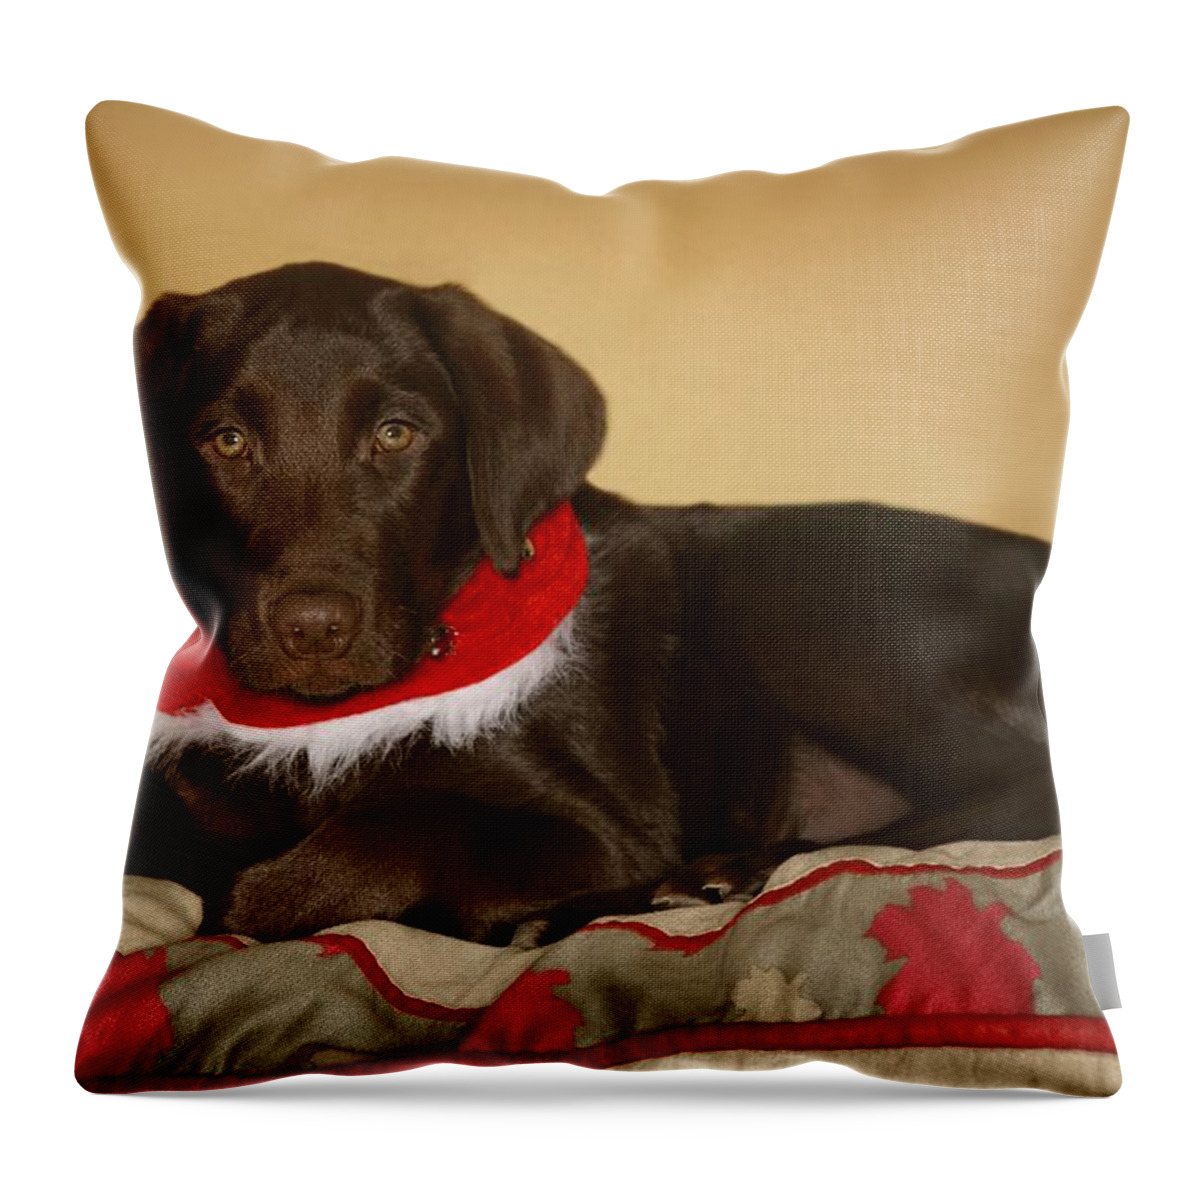 Animals Throw Pillow featuring the photograph Dog With Christmas Collar by Leah Hammond